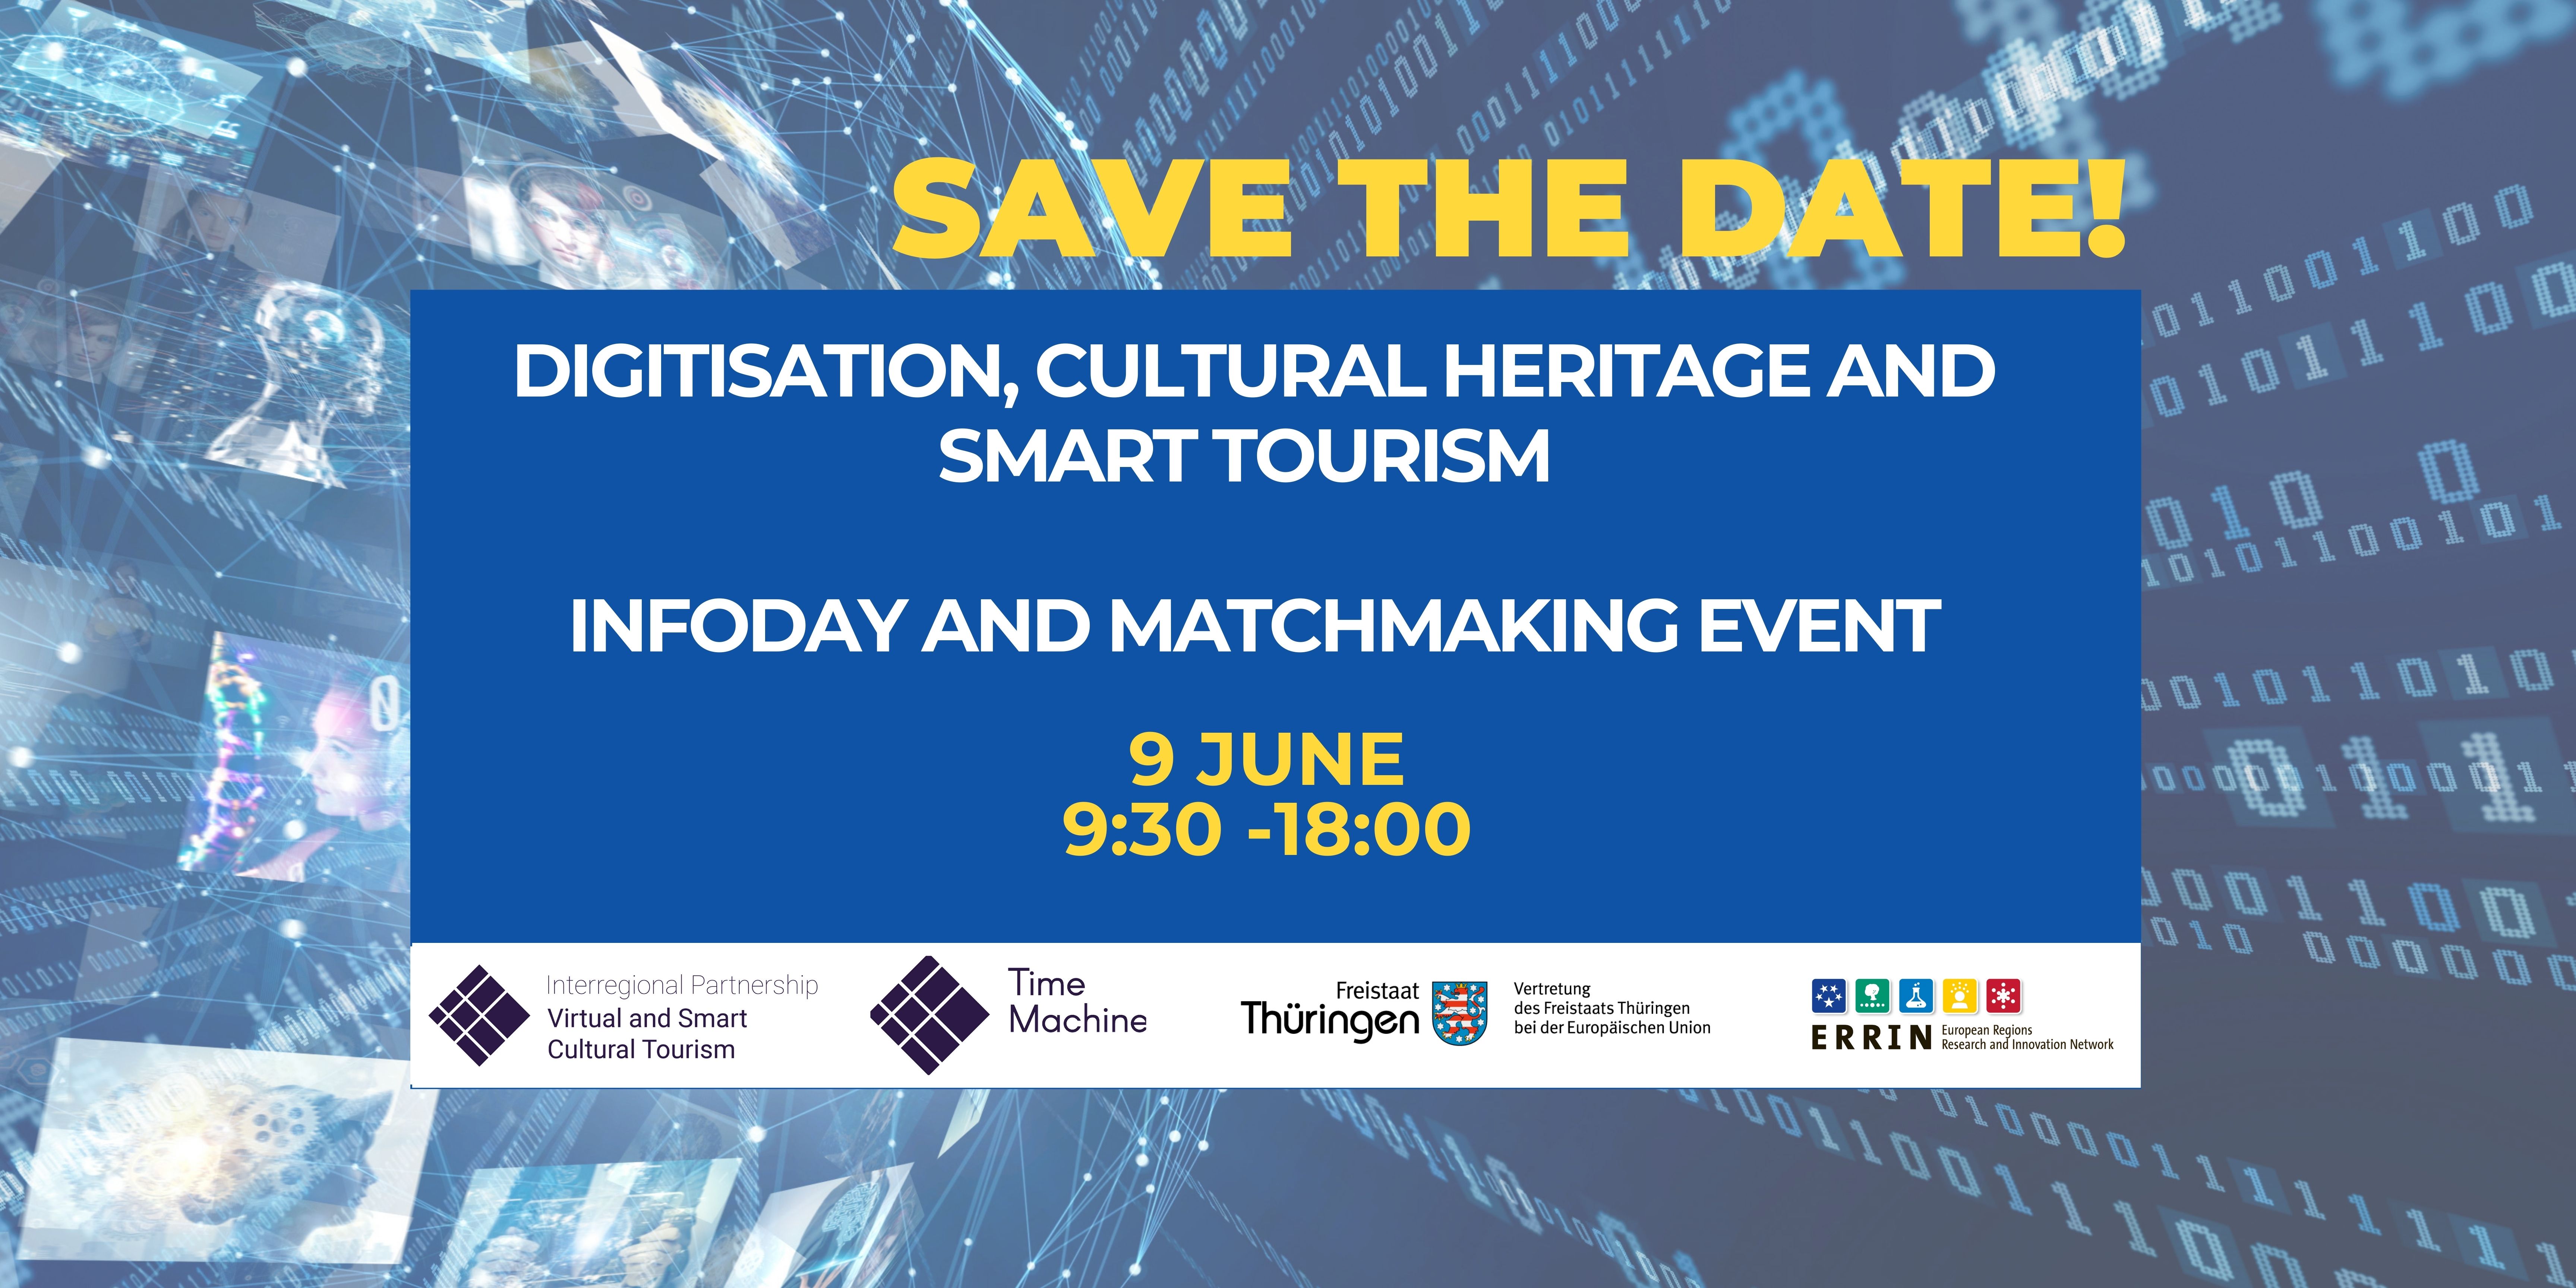 Digitisation, Cultural Heritage and Smart Tourism Infoday and Matchmaking Event 